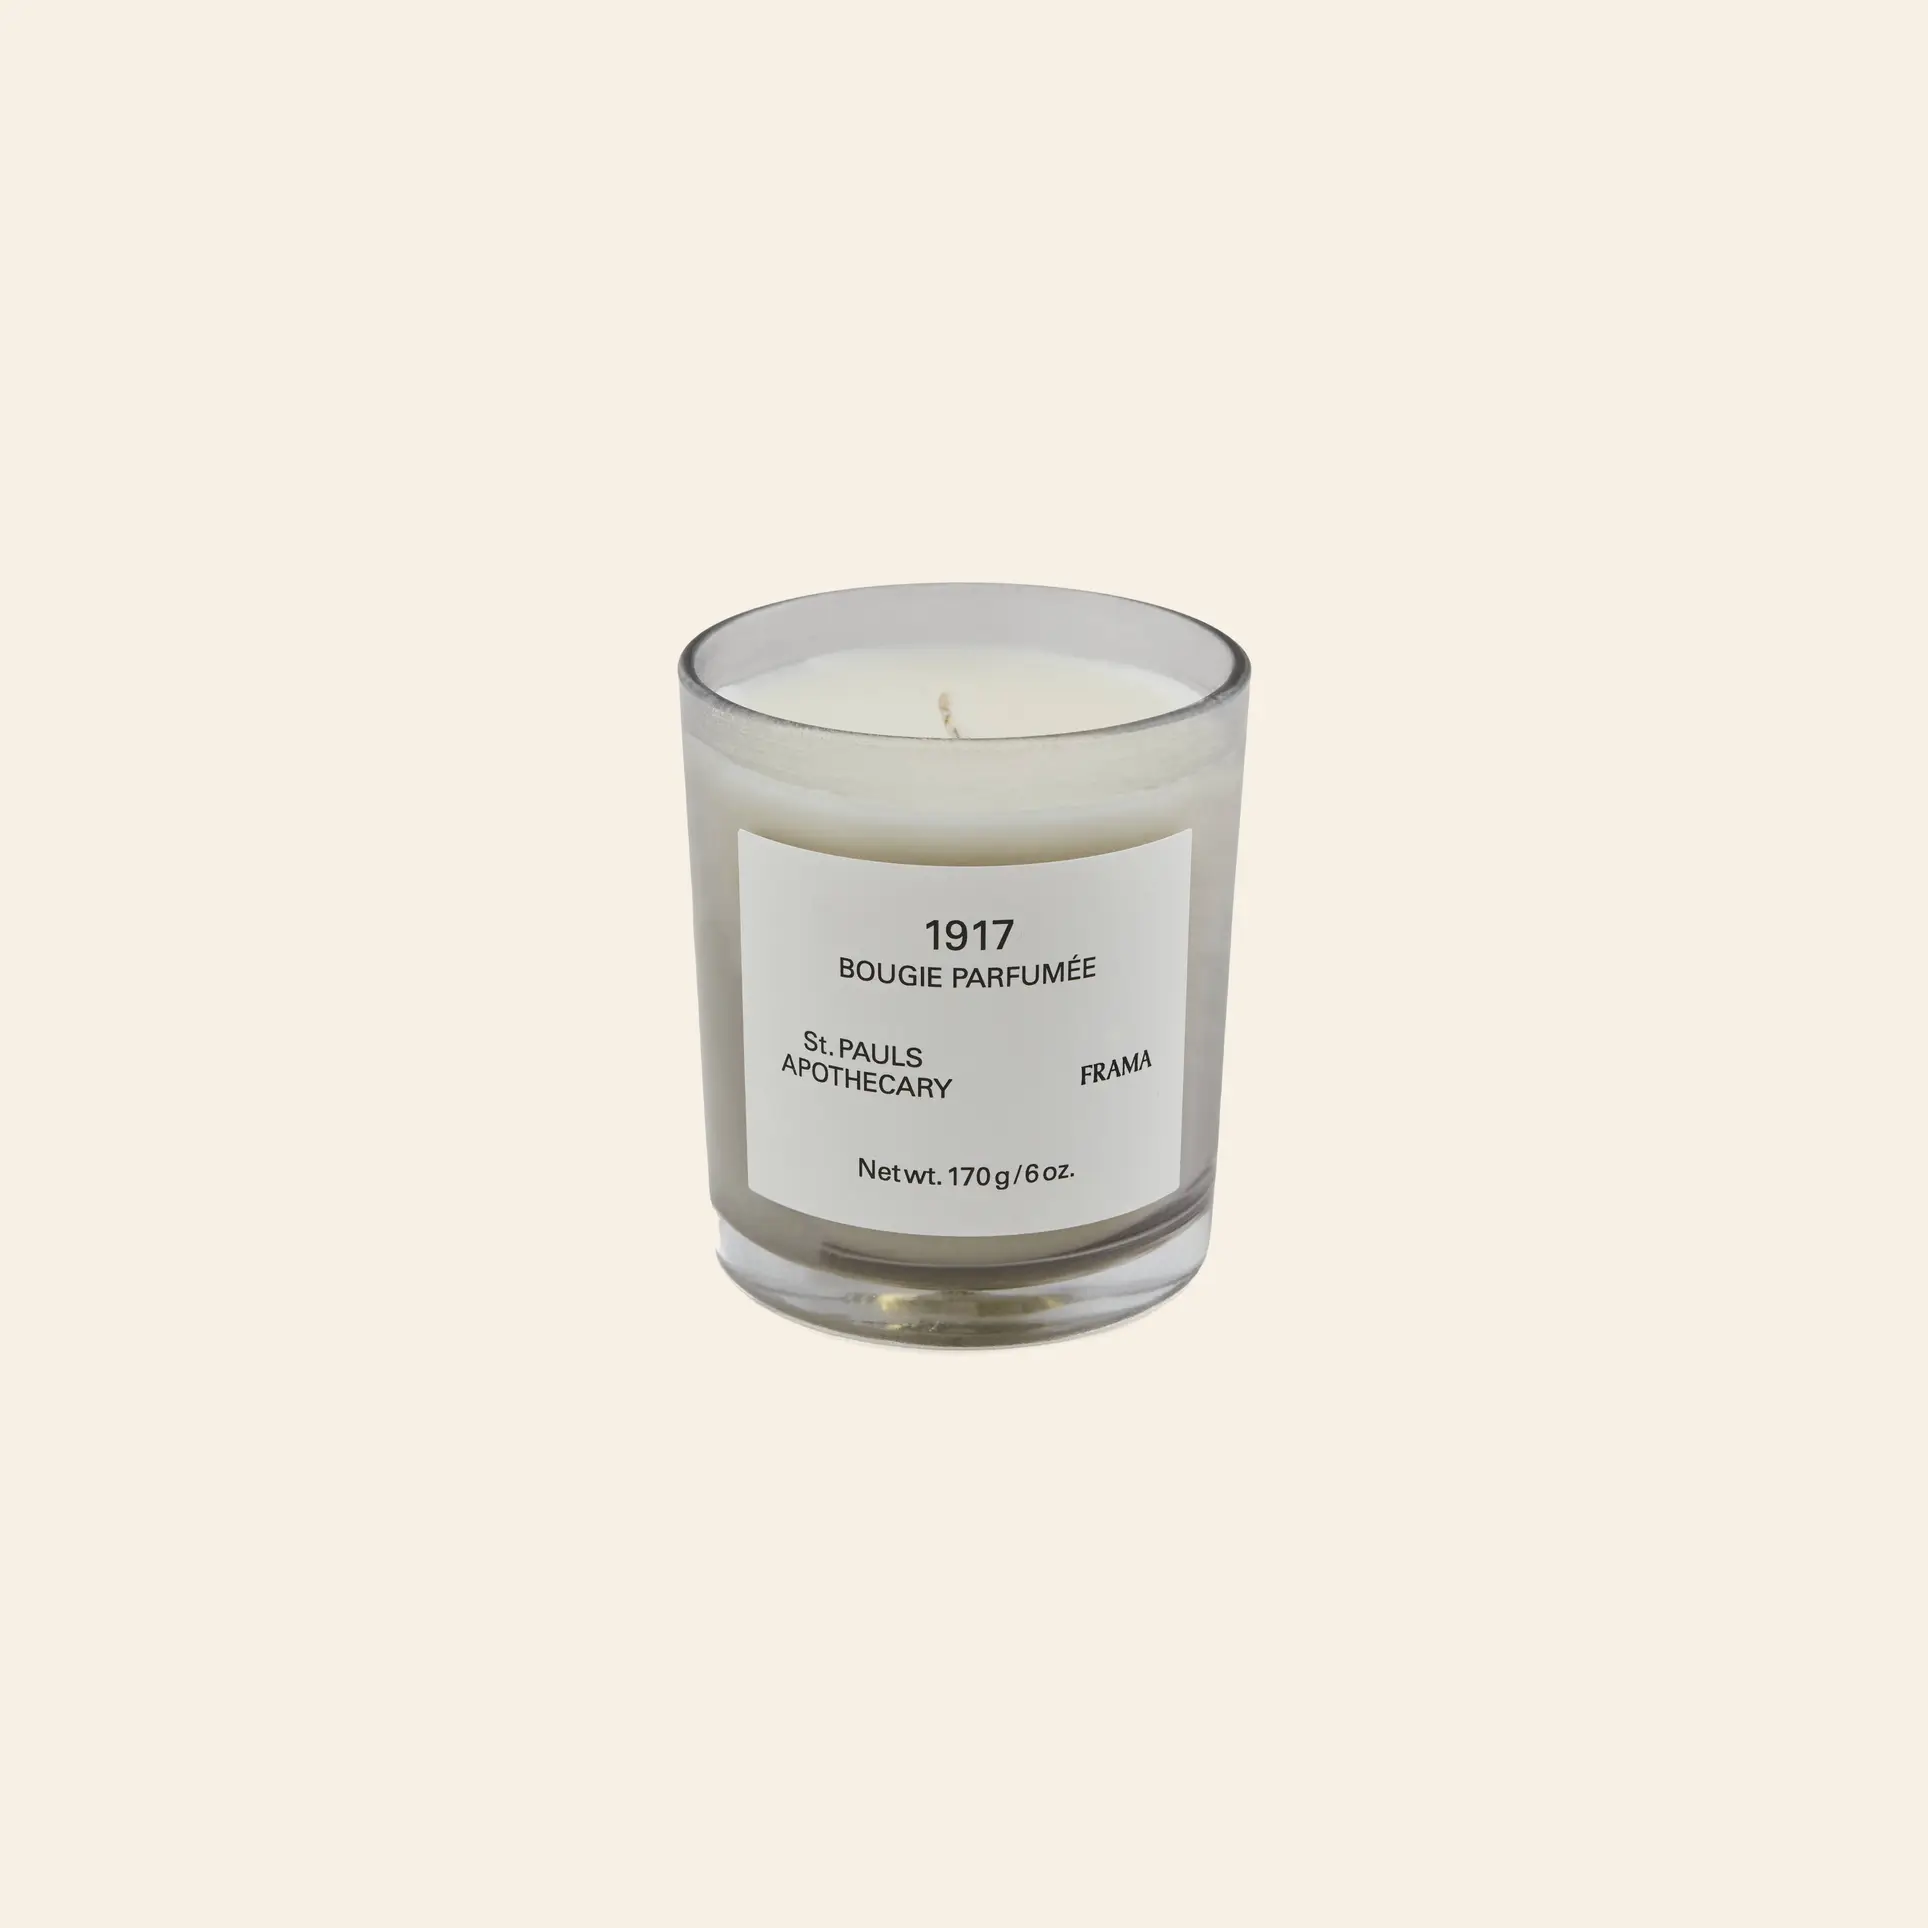 FRAMA Scented Candle 170g 1917 1